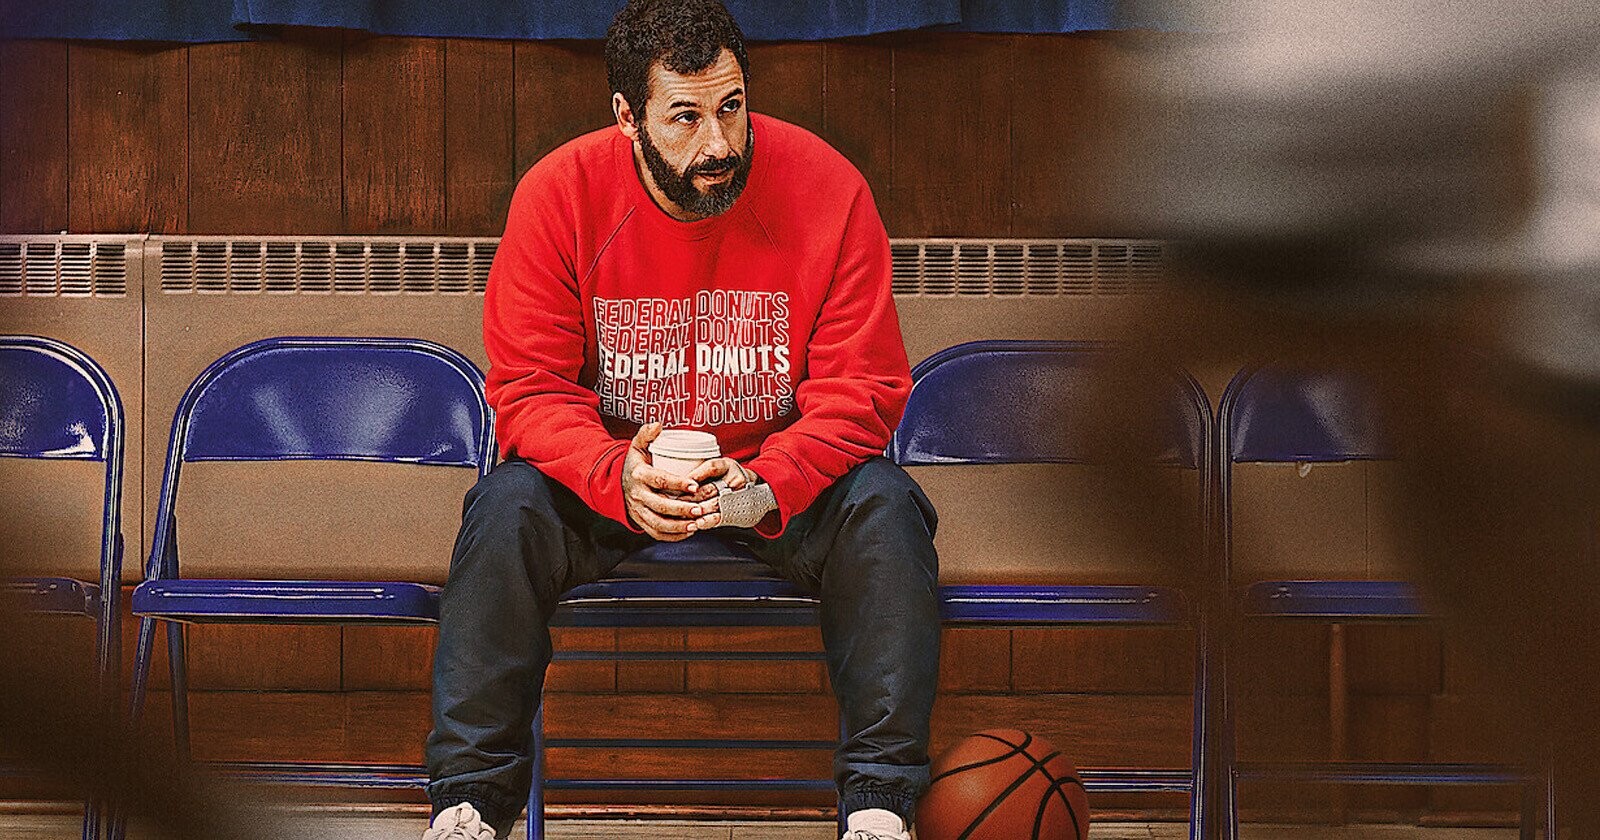 Adam Sandler Carries More Than Anybody in Basketball, According to the NBA Commissioner